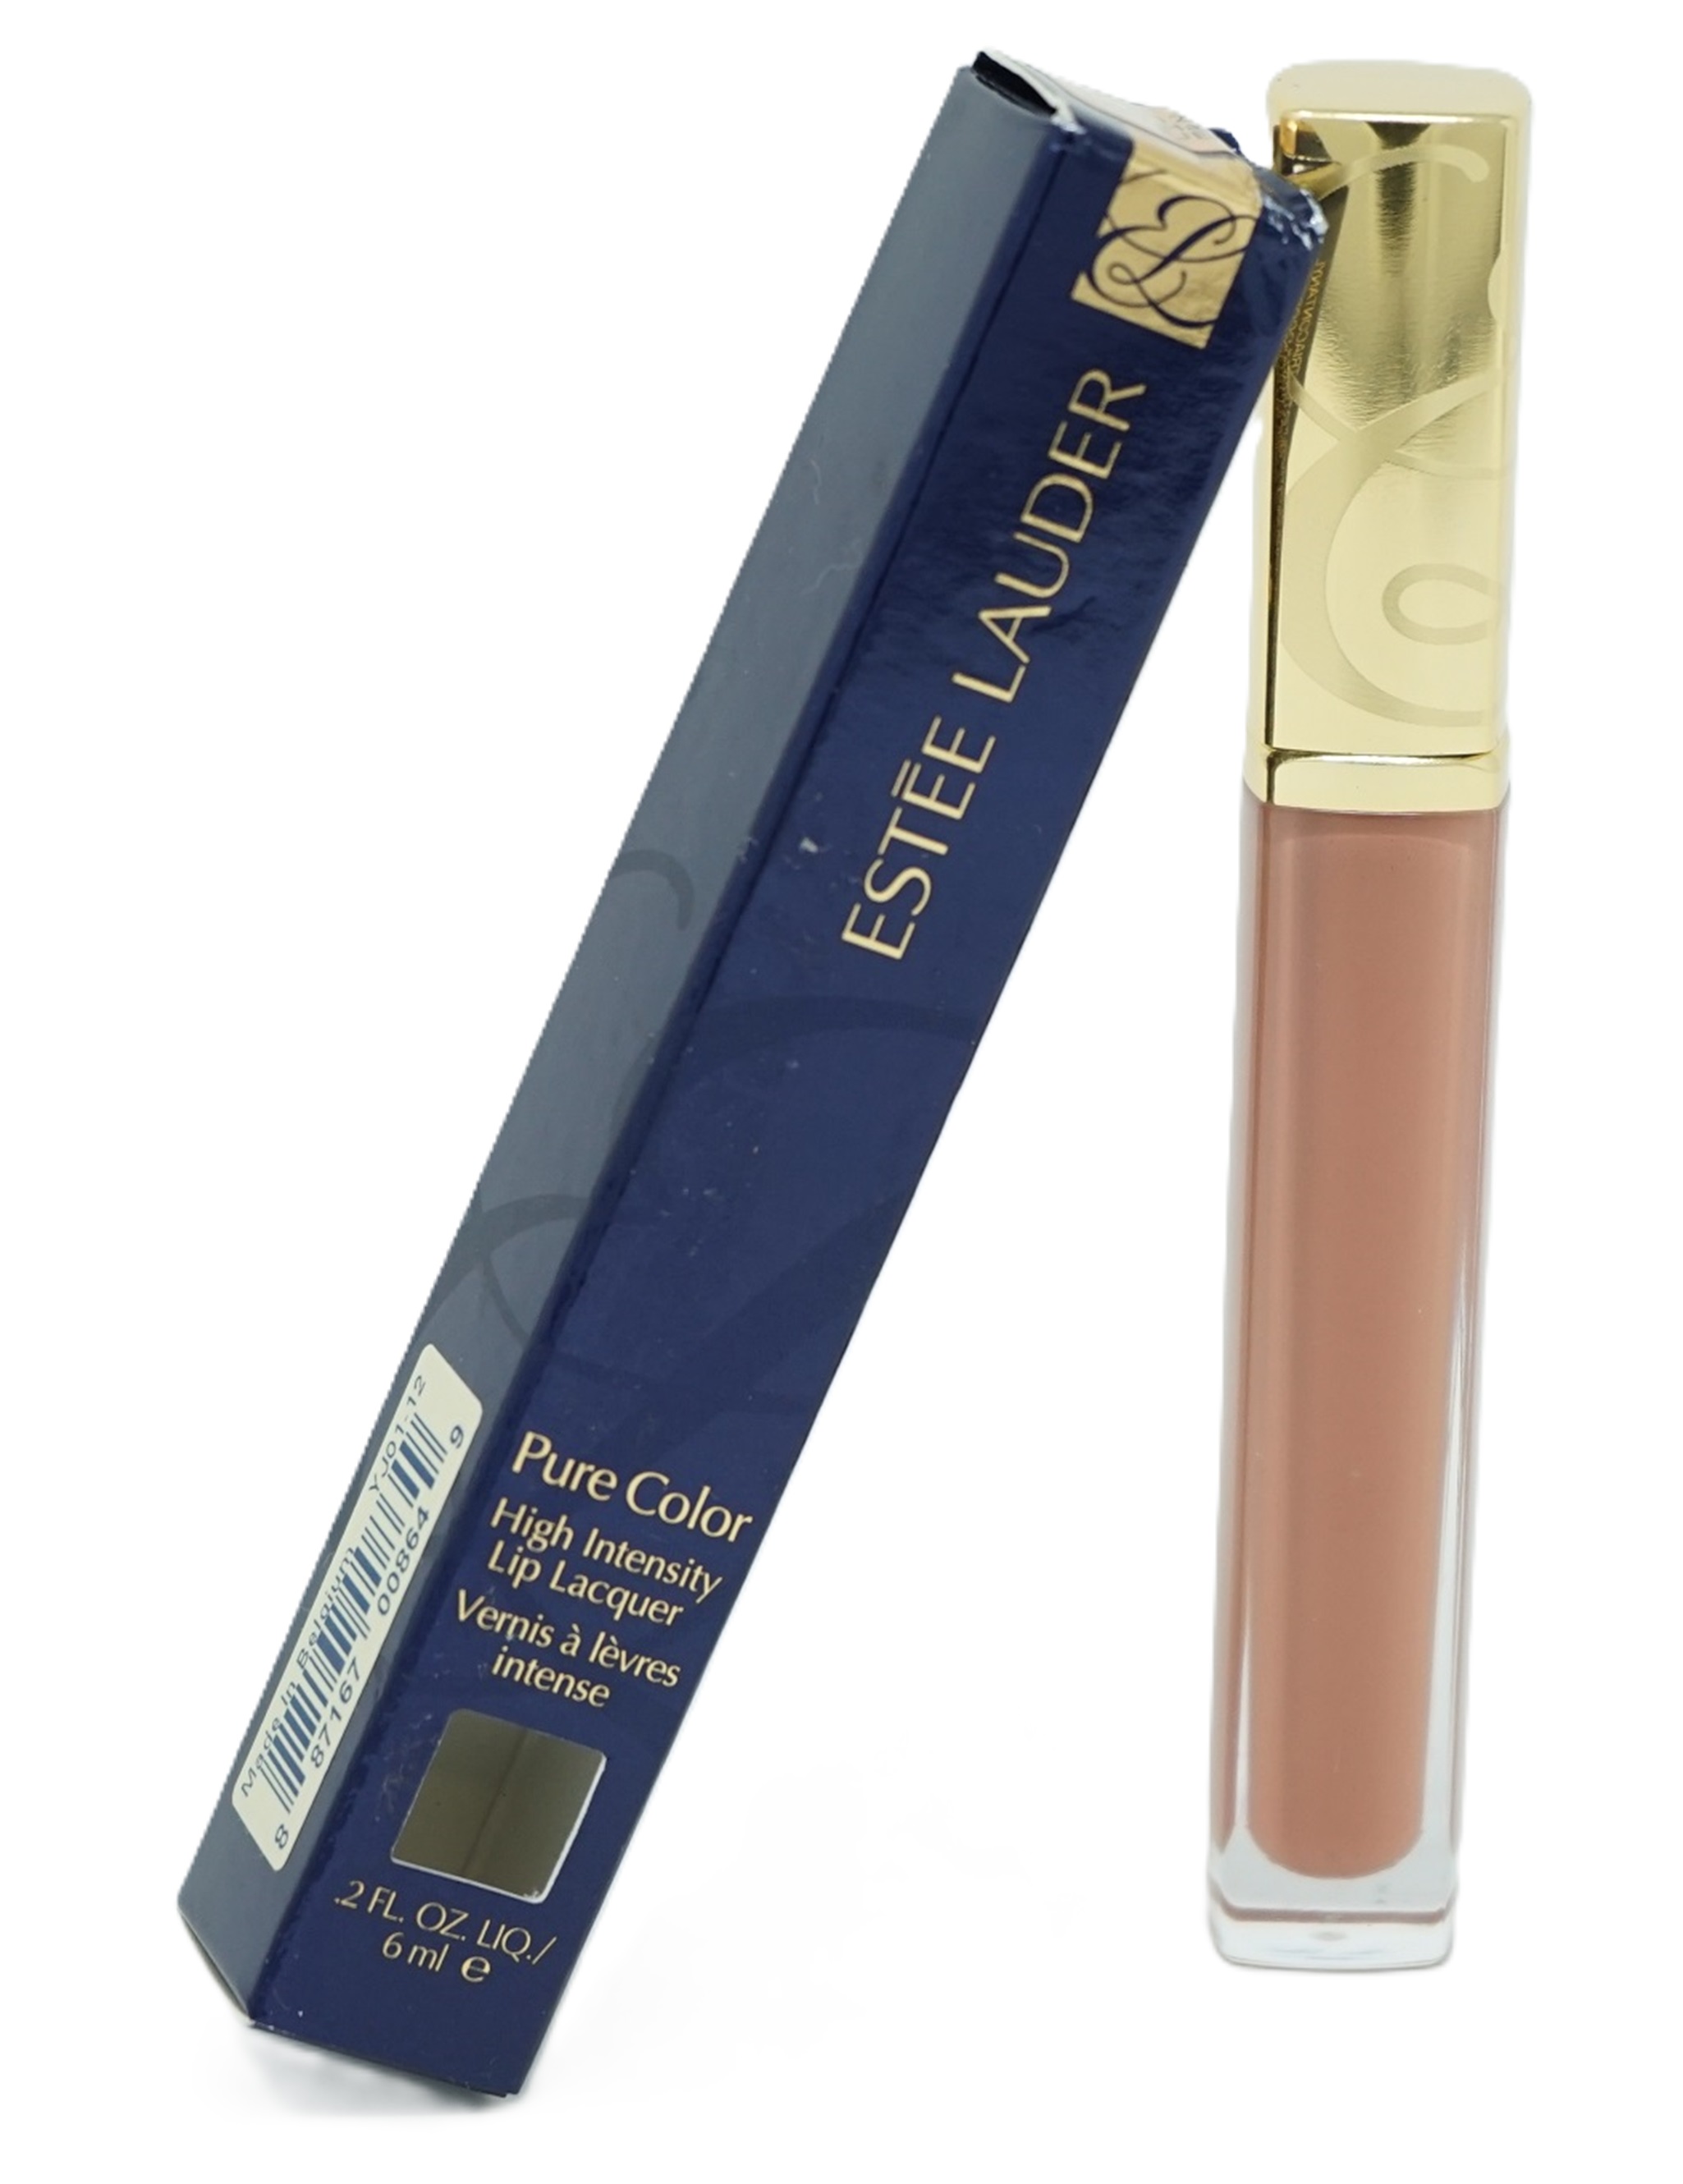 Estee Lauder Pure Color High Intensity Lip Lacquer PCLL 12 Amber Halo